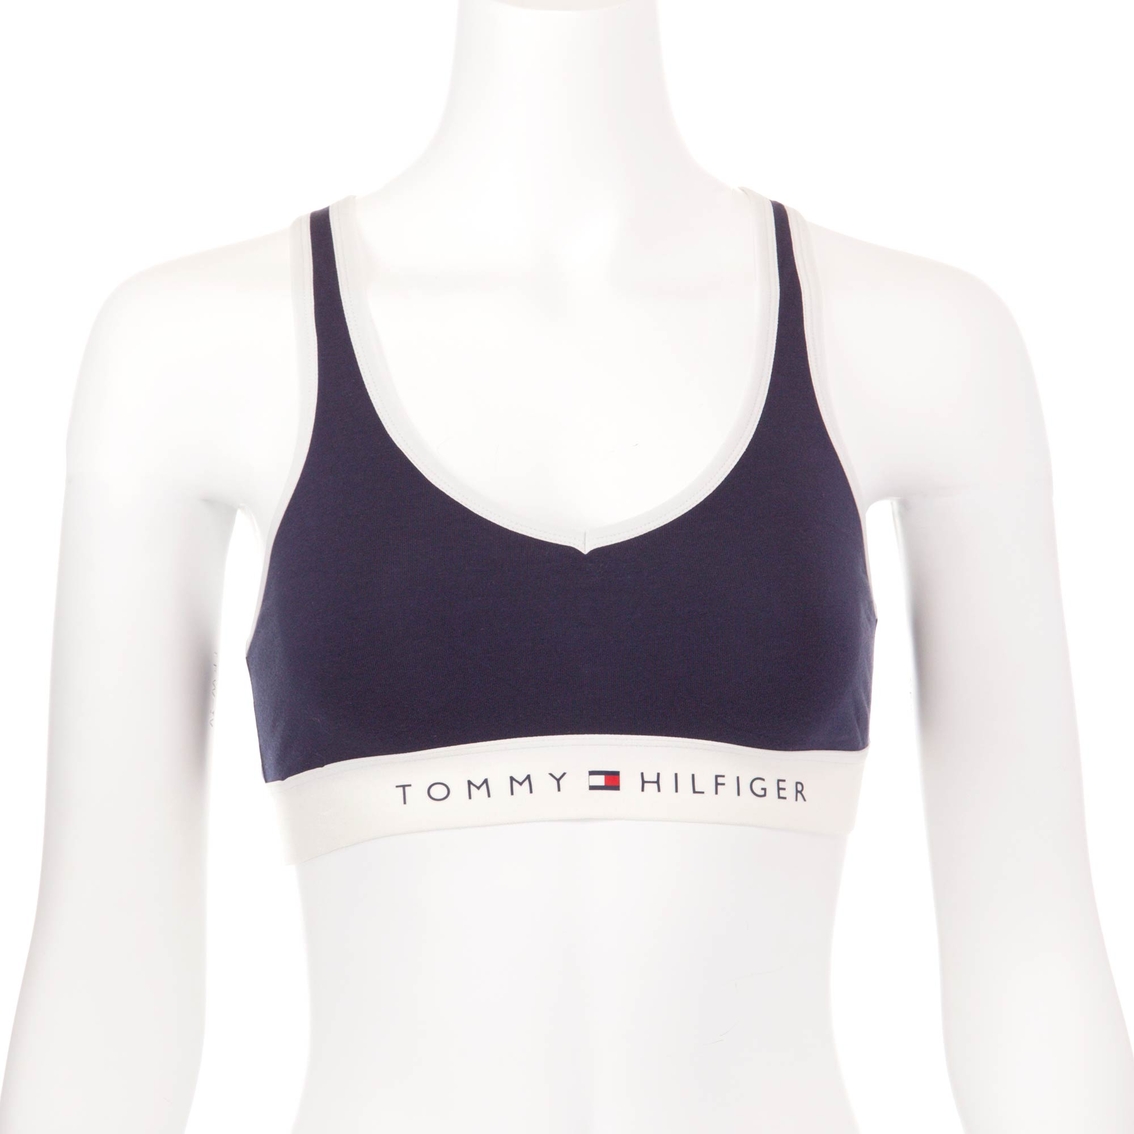 Tommy Hilfiger Lounge Logo Band Sports Bra, Bras, Clothing & Accessories